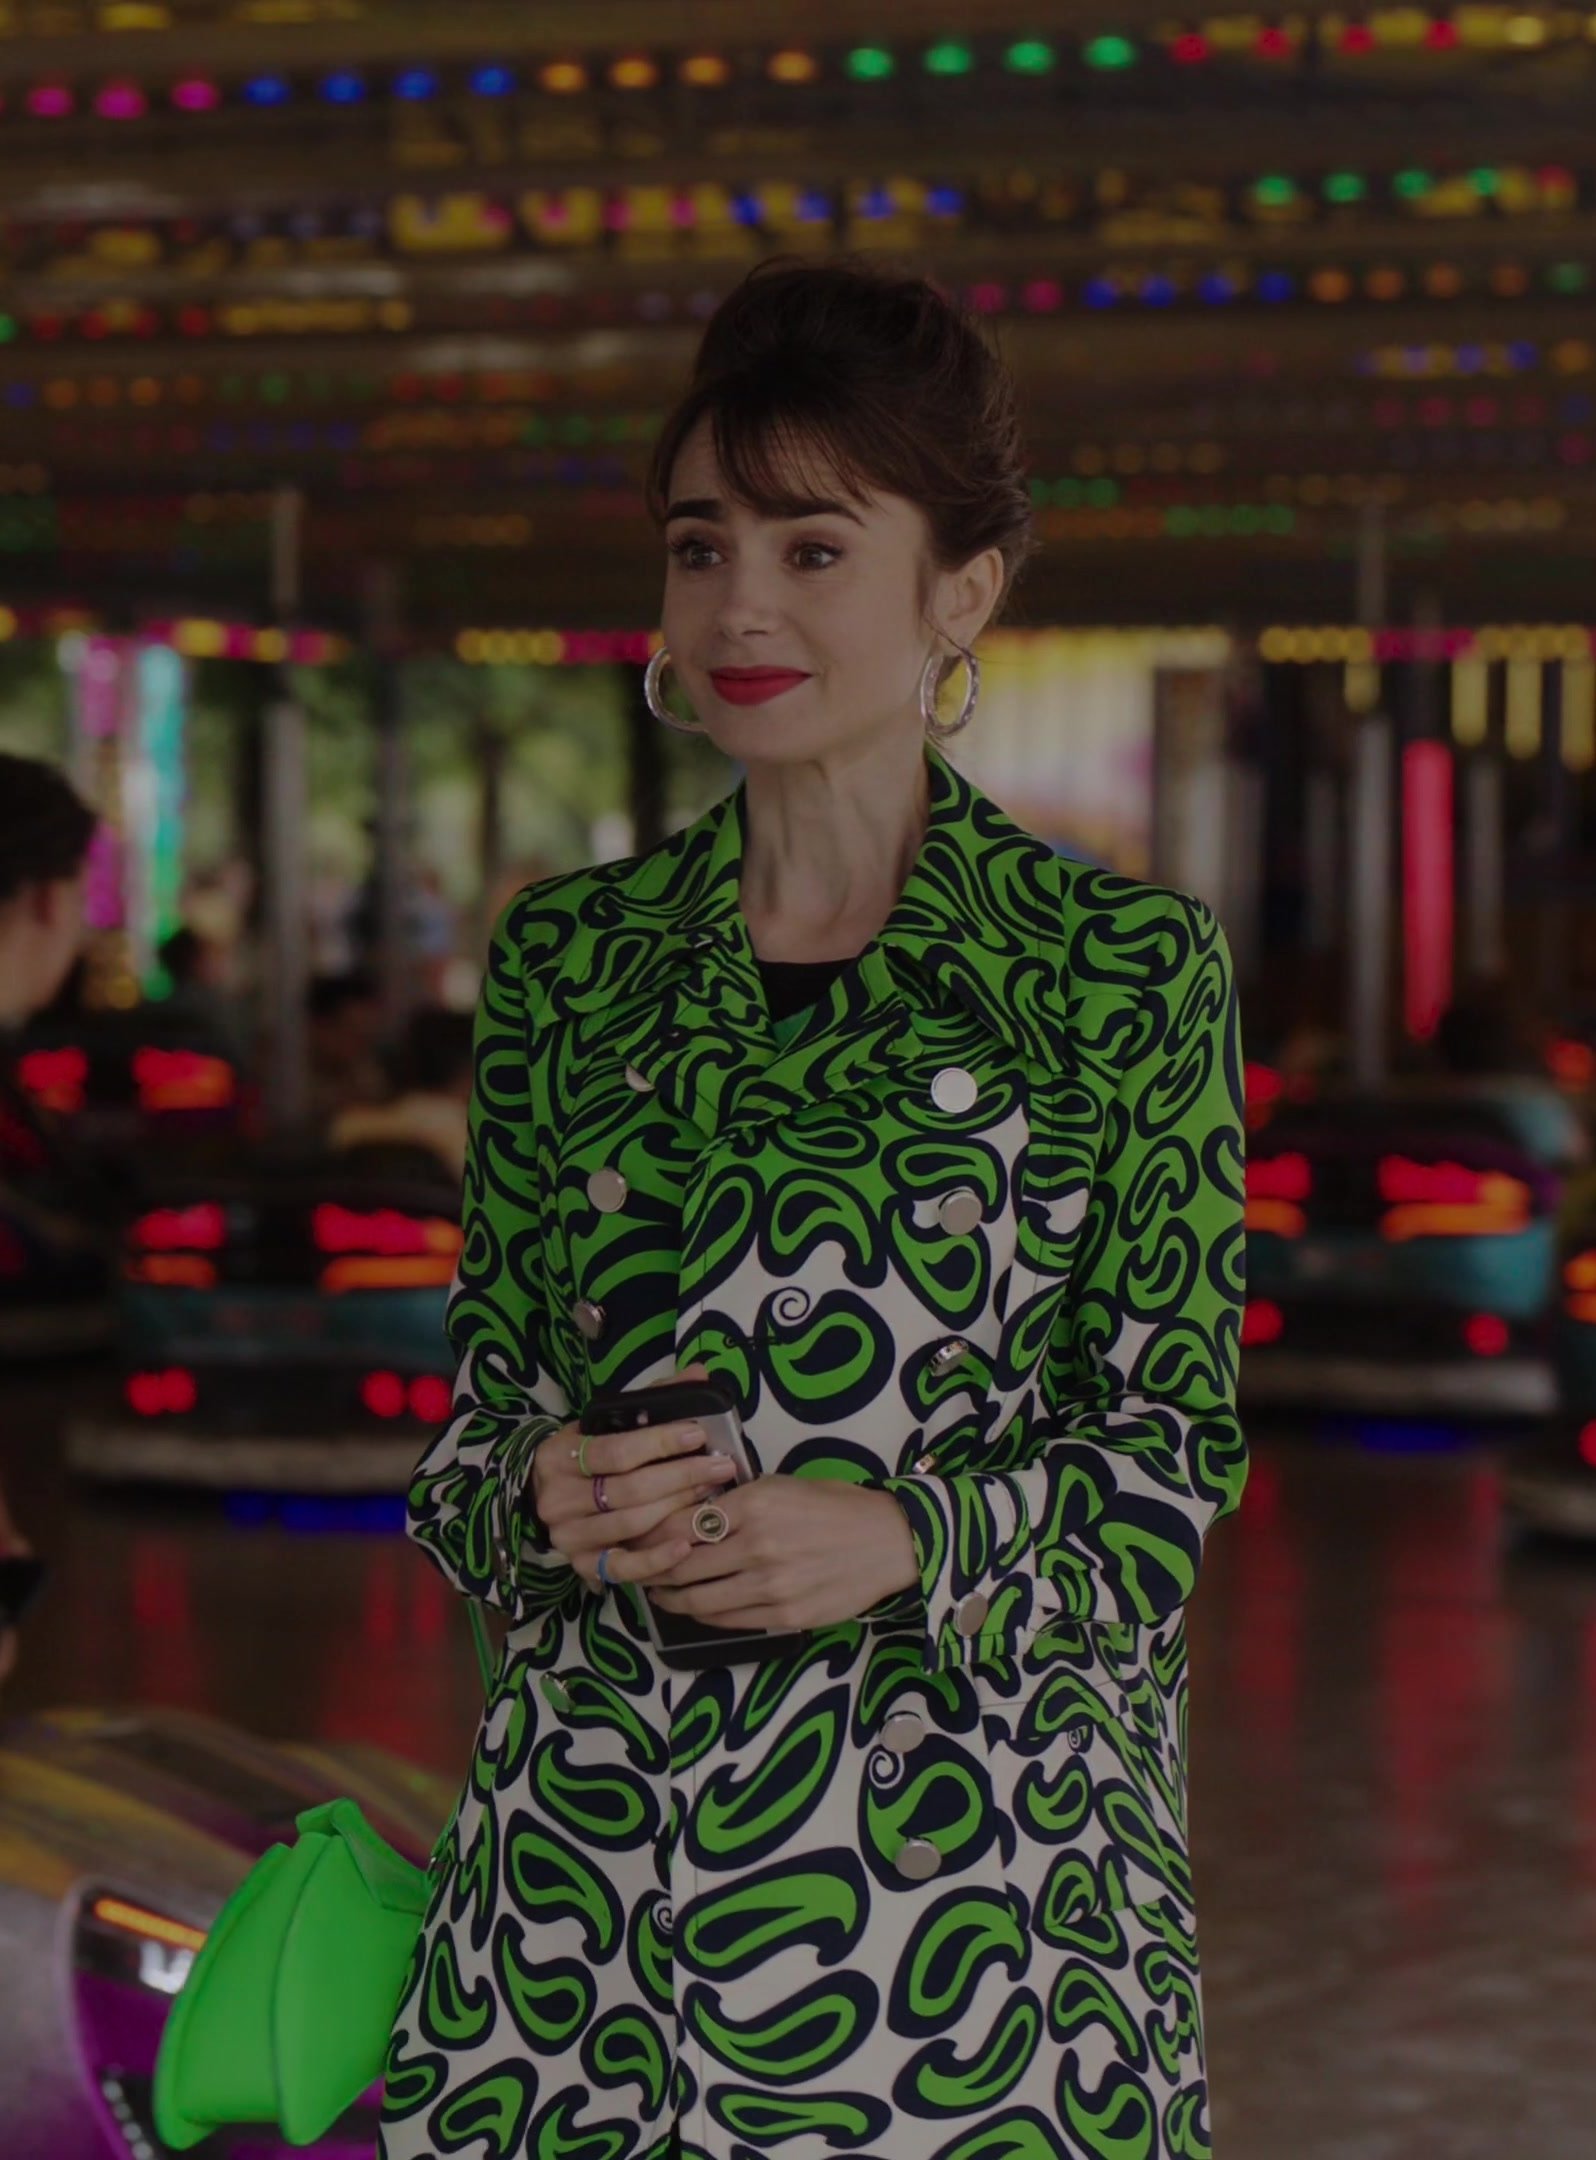 Worn on Emily in Paris TV Show - Green Patterned Coat of Lily Collins as Emily Cooper